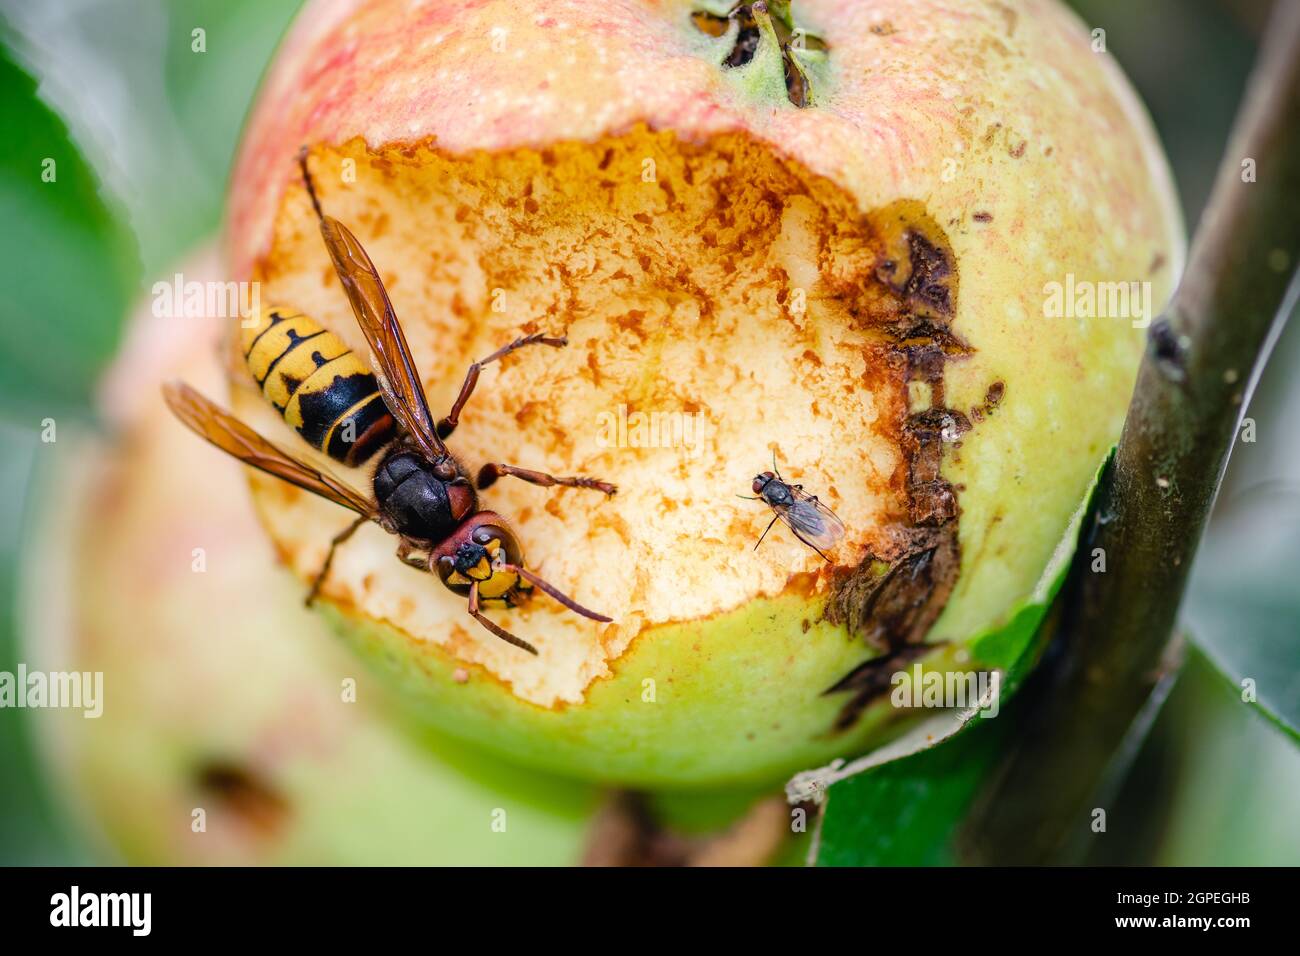 Giant European hornet wasp or Vespa crabro with small fly eating an apple hanging from a tree, close up Stock Photo